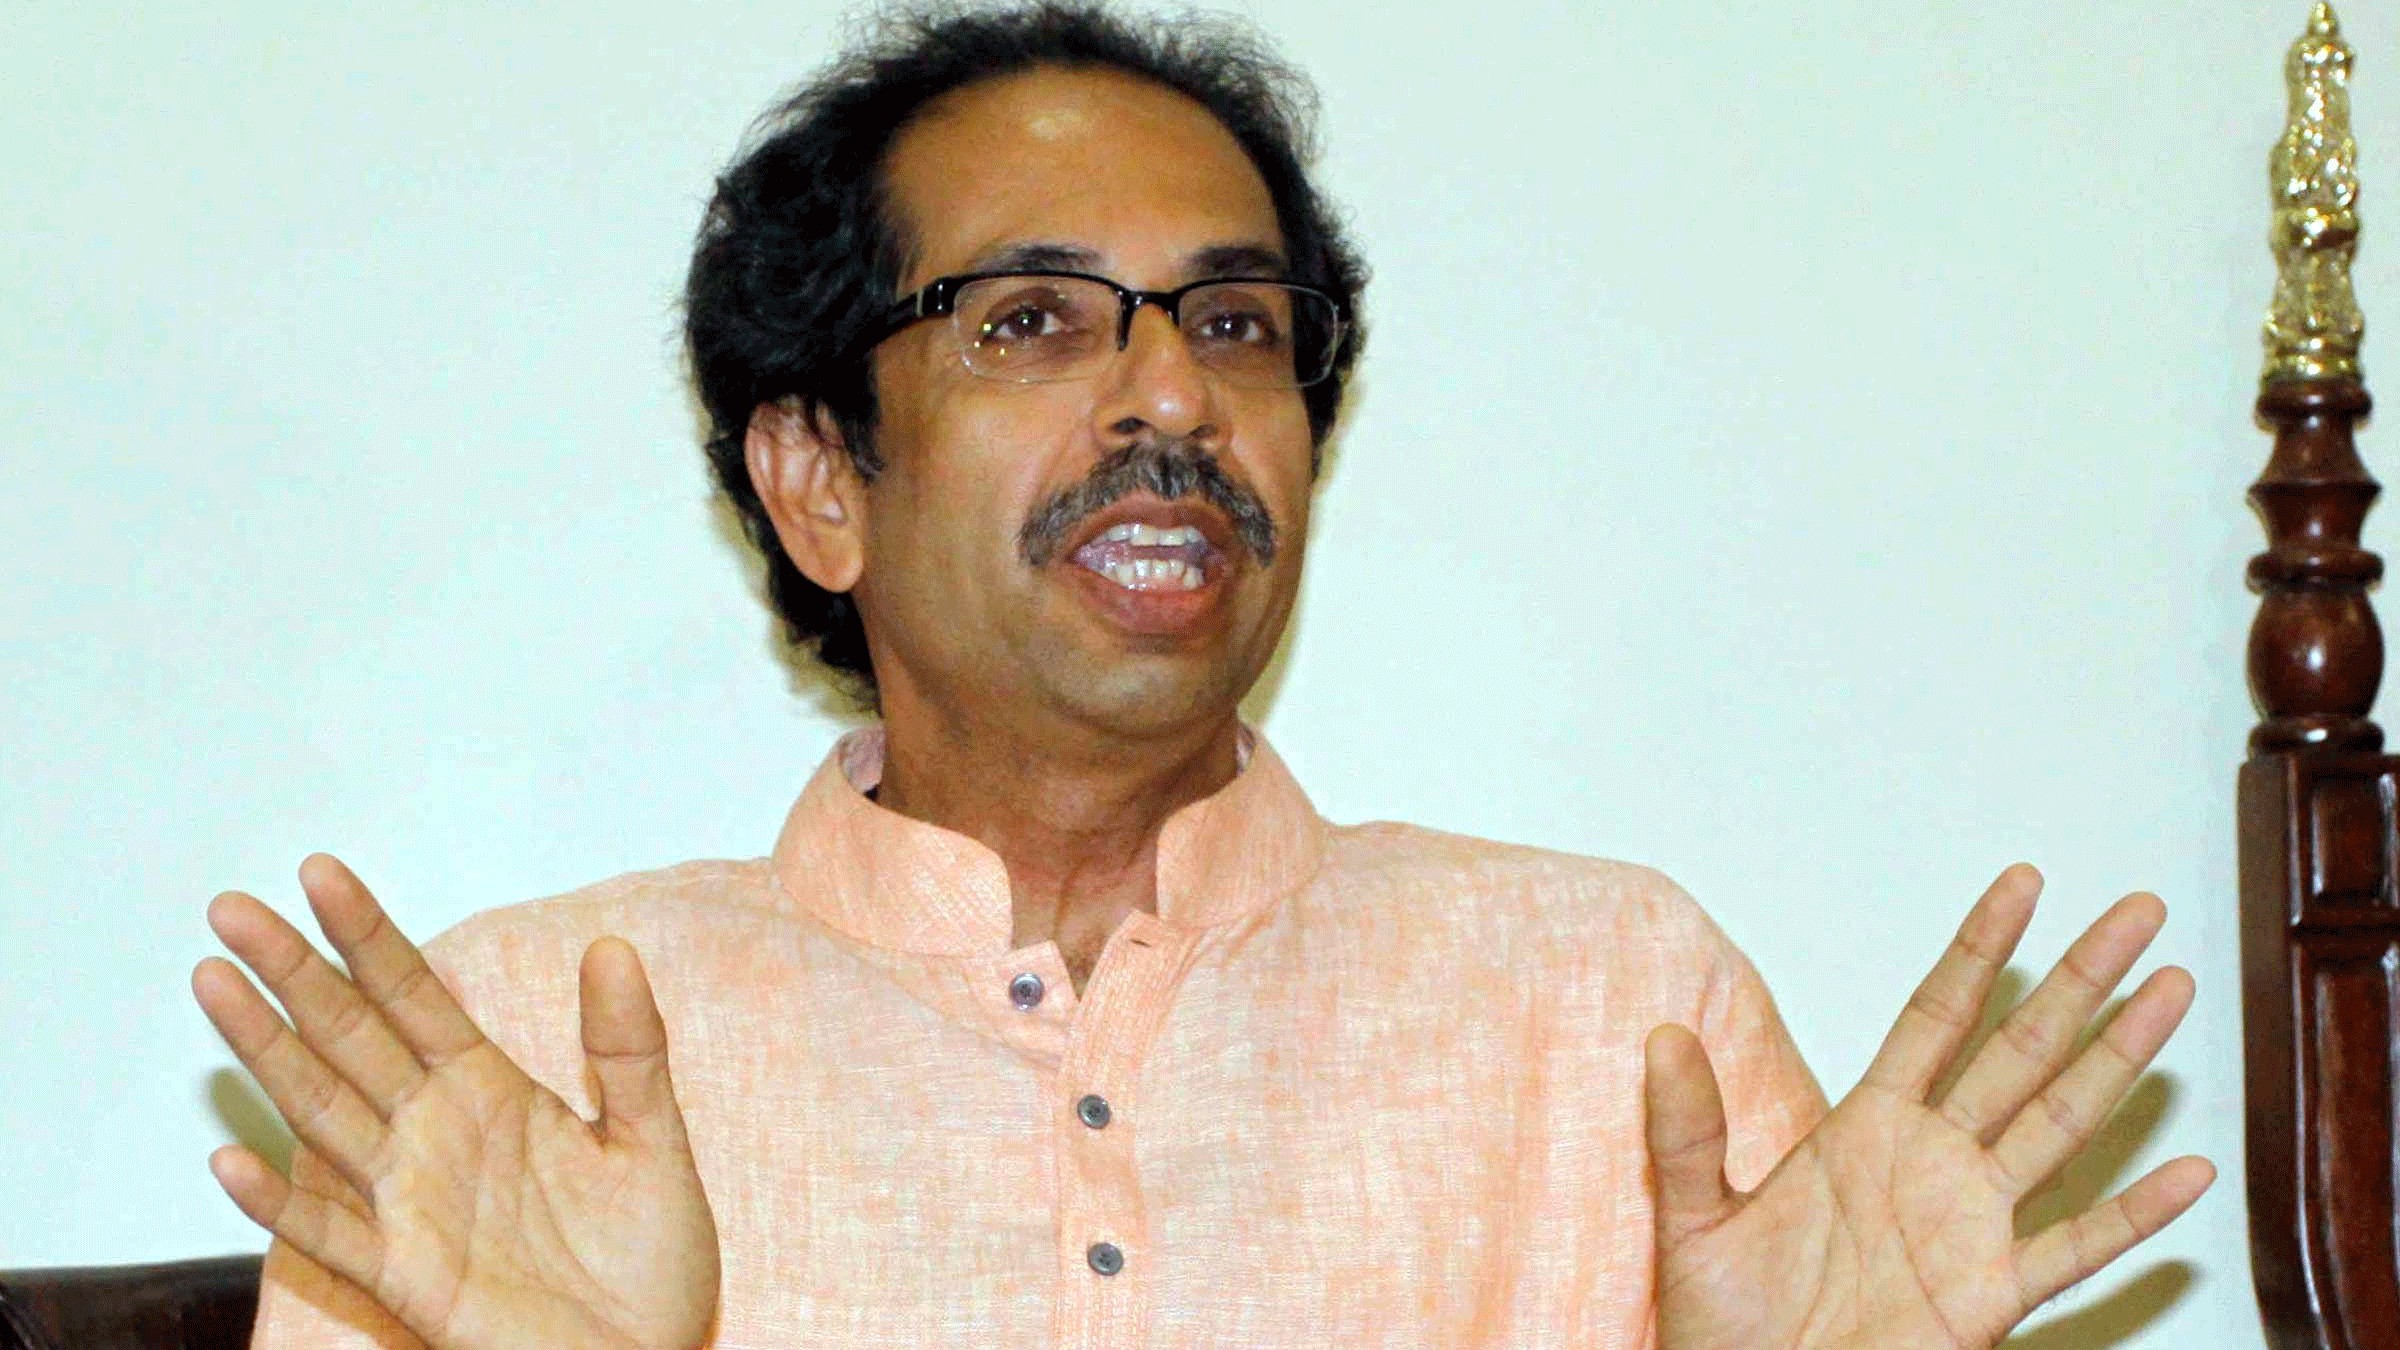 BJP won't win even district-level elections in future: Uddhav Thackeray